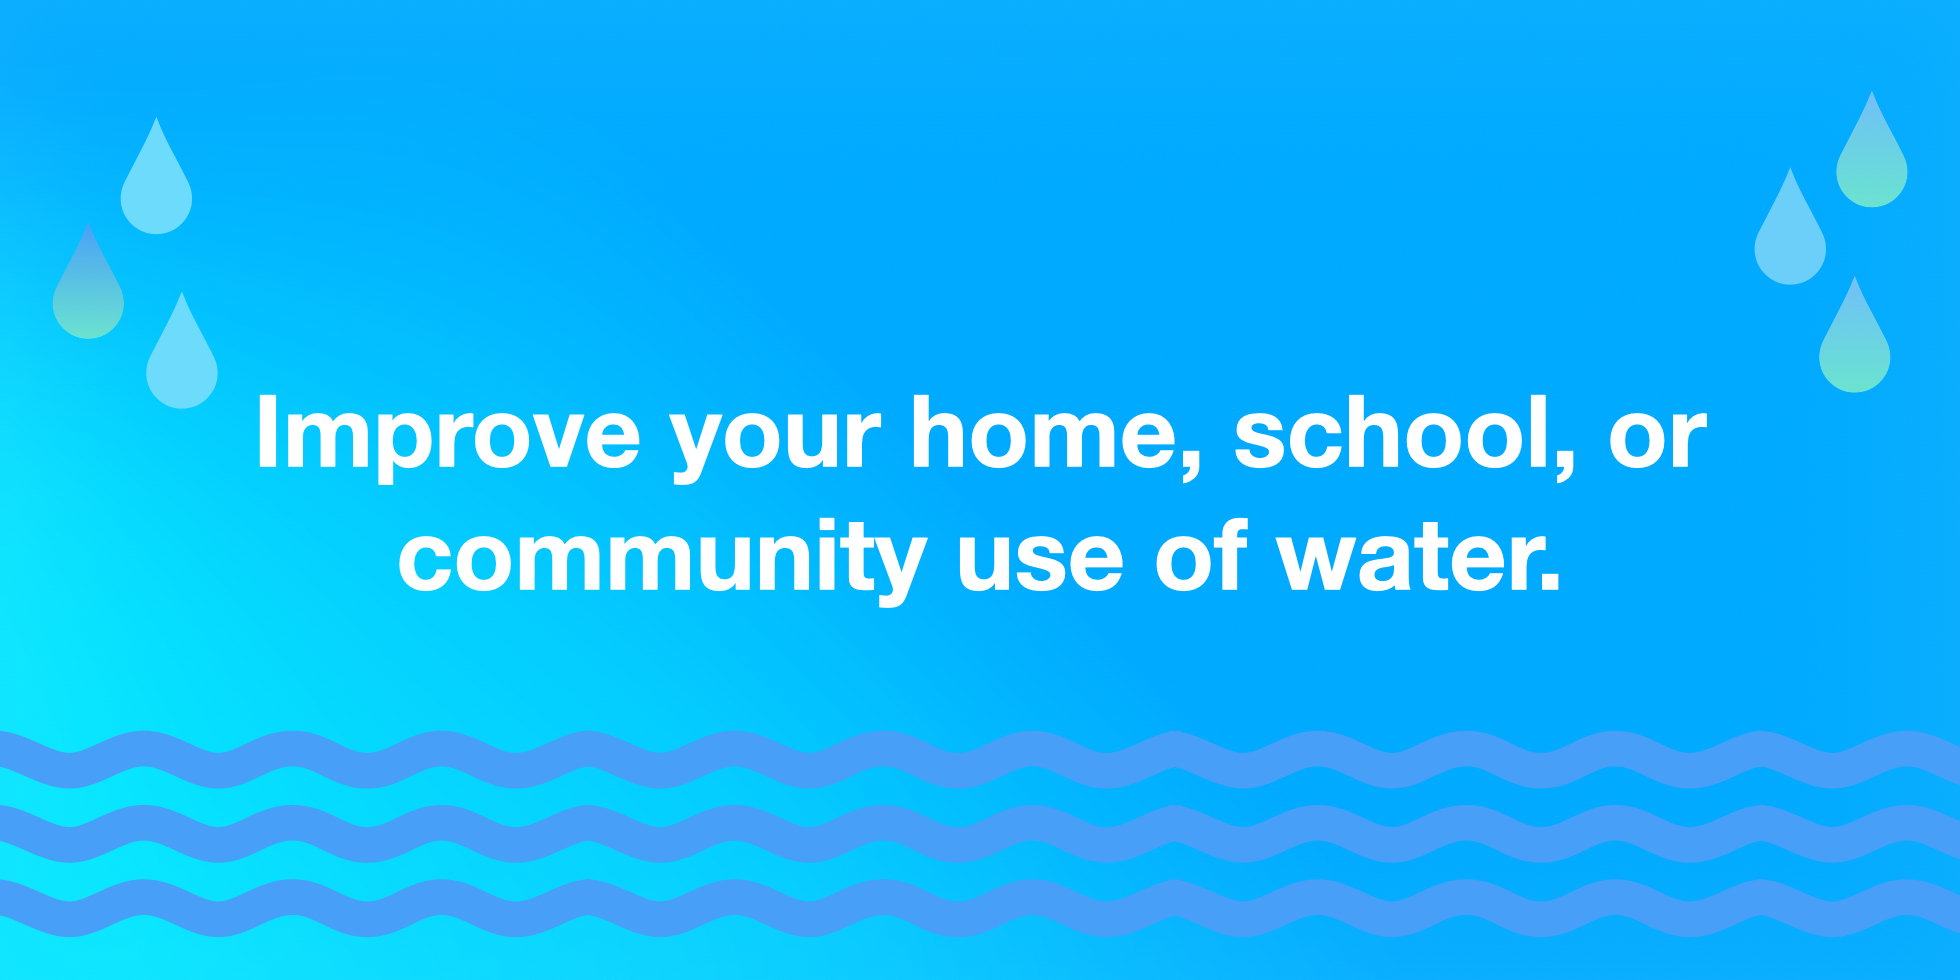 Text "Improve your home, school, or community use of water" on a blue gradient background with water droplets surrounding it.